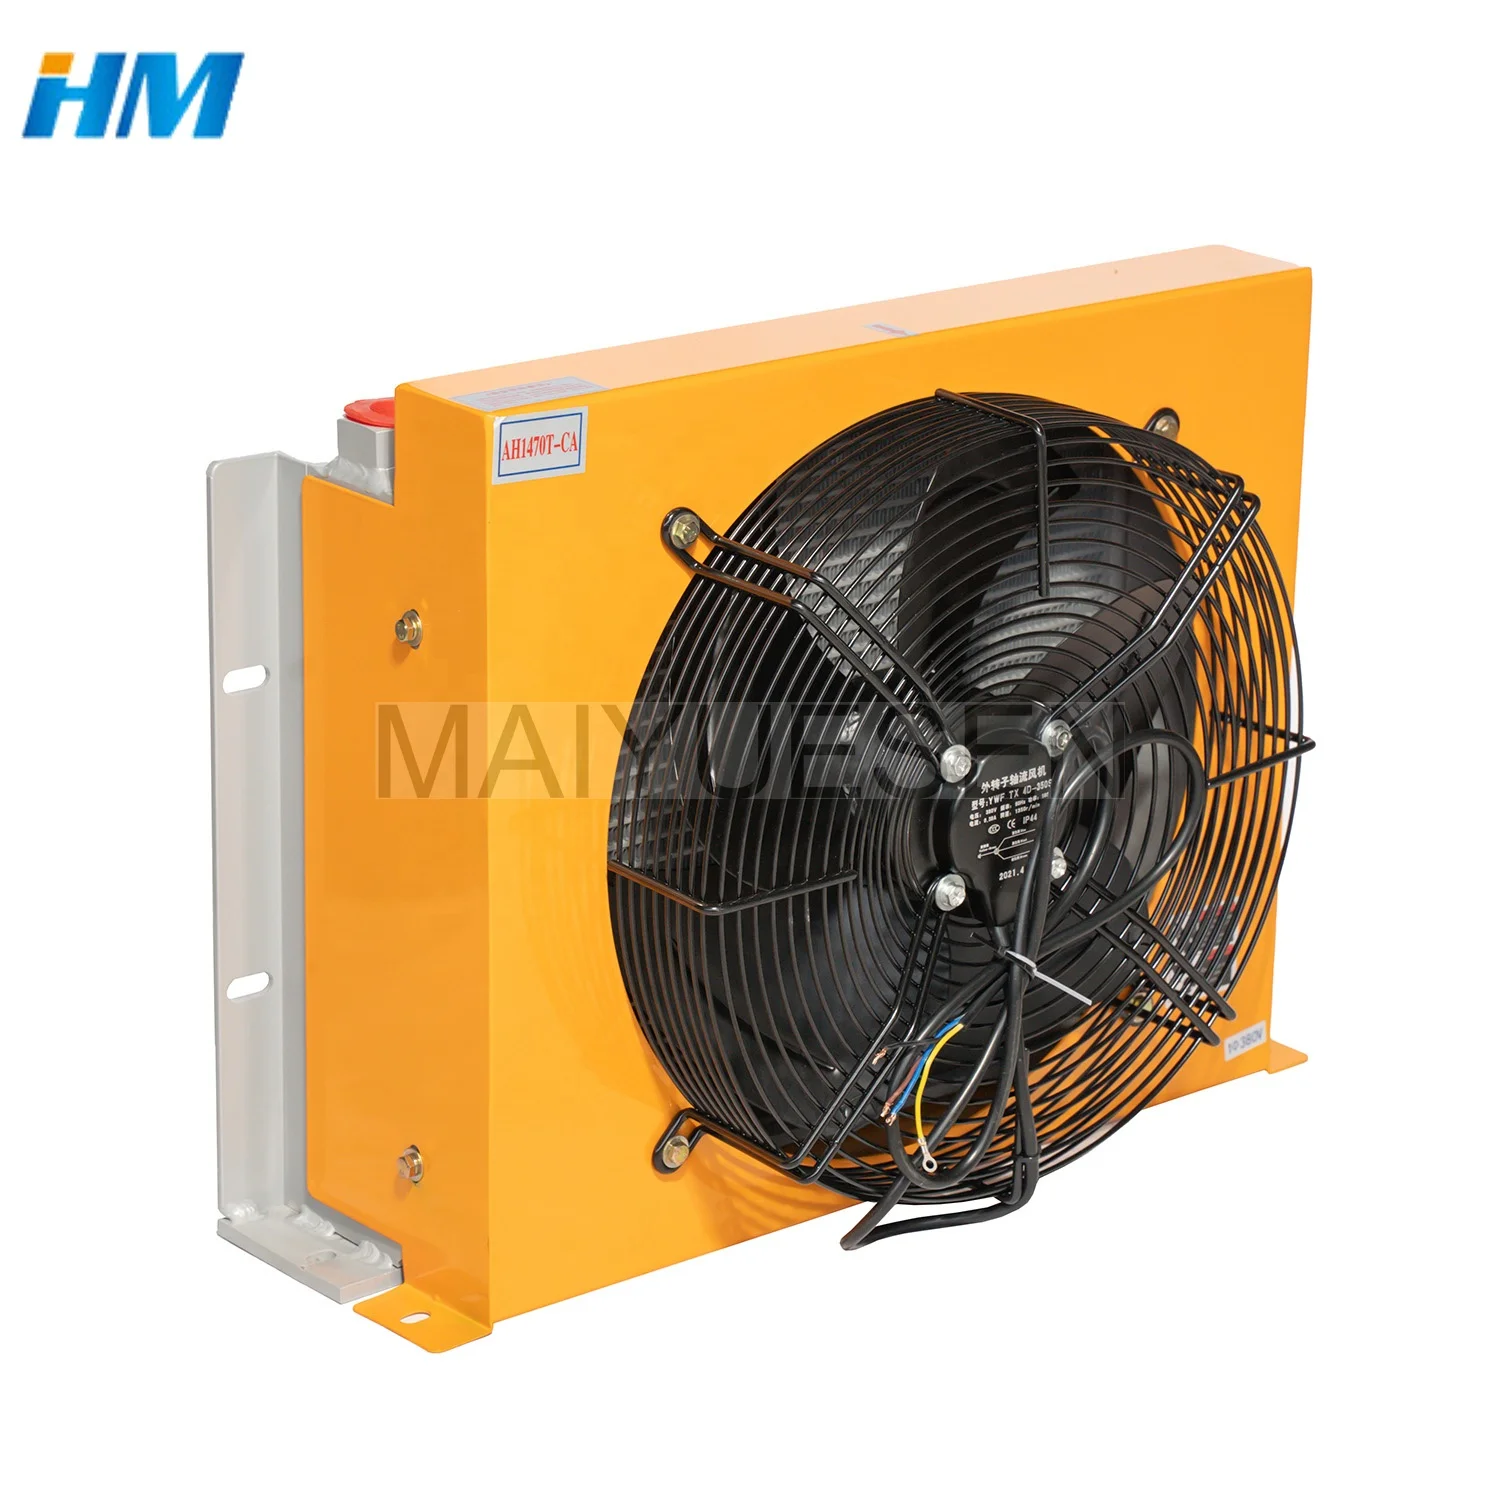 

China Manufacture Aluminum air cooled Oil Cooler Radiator AH1470T-CA hydraulic oil air cooler air cooled oil cooler